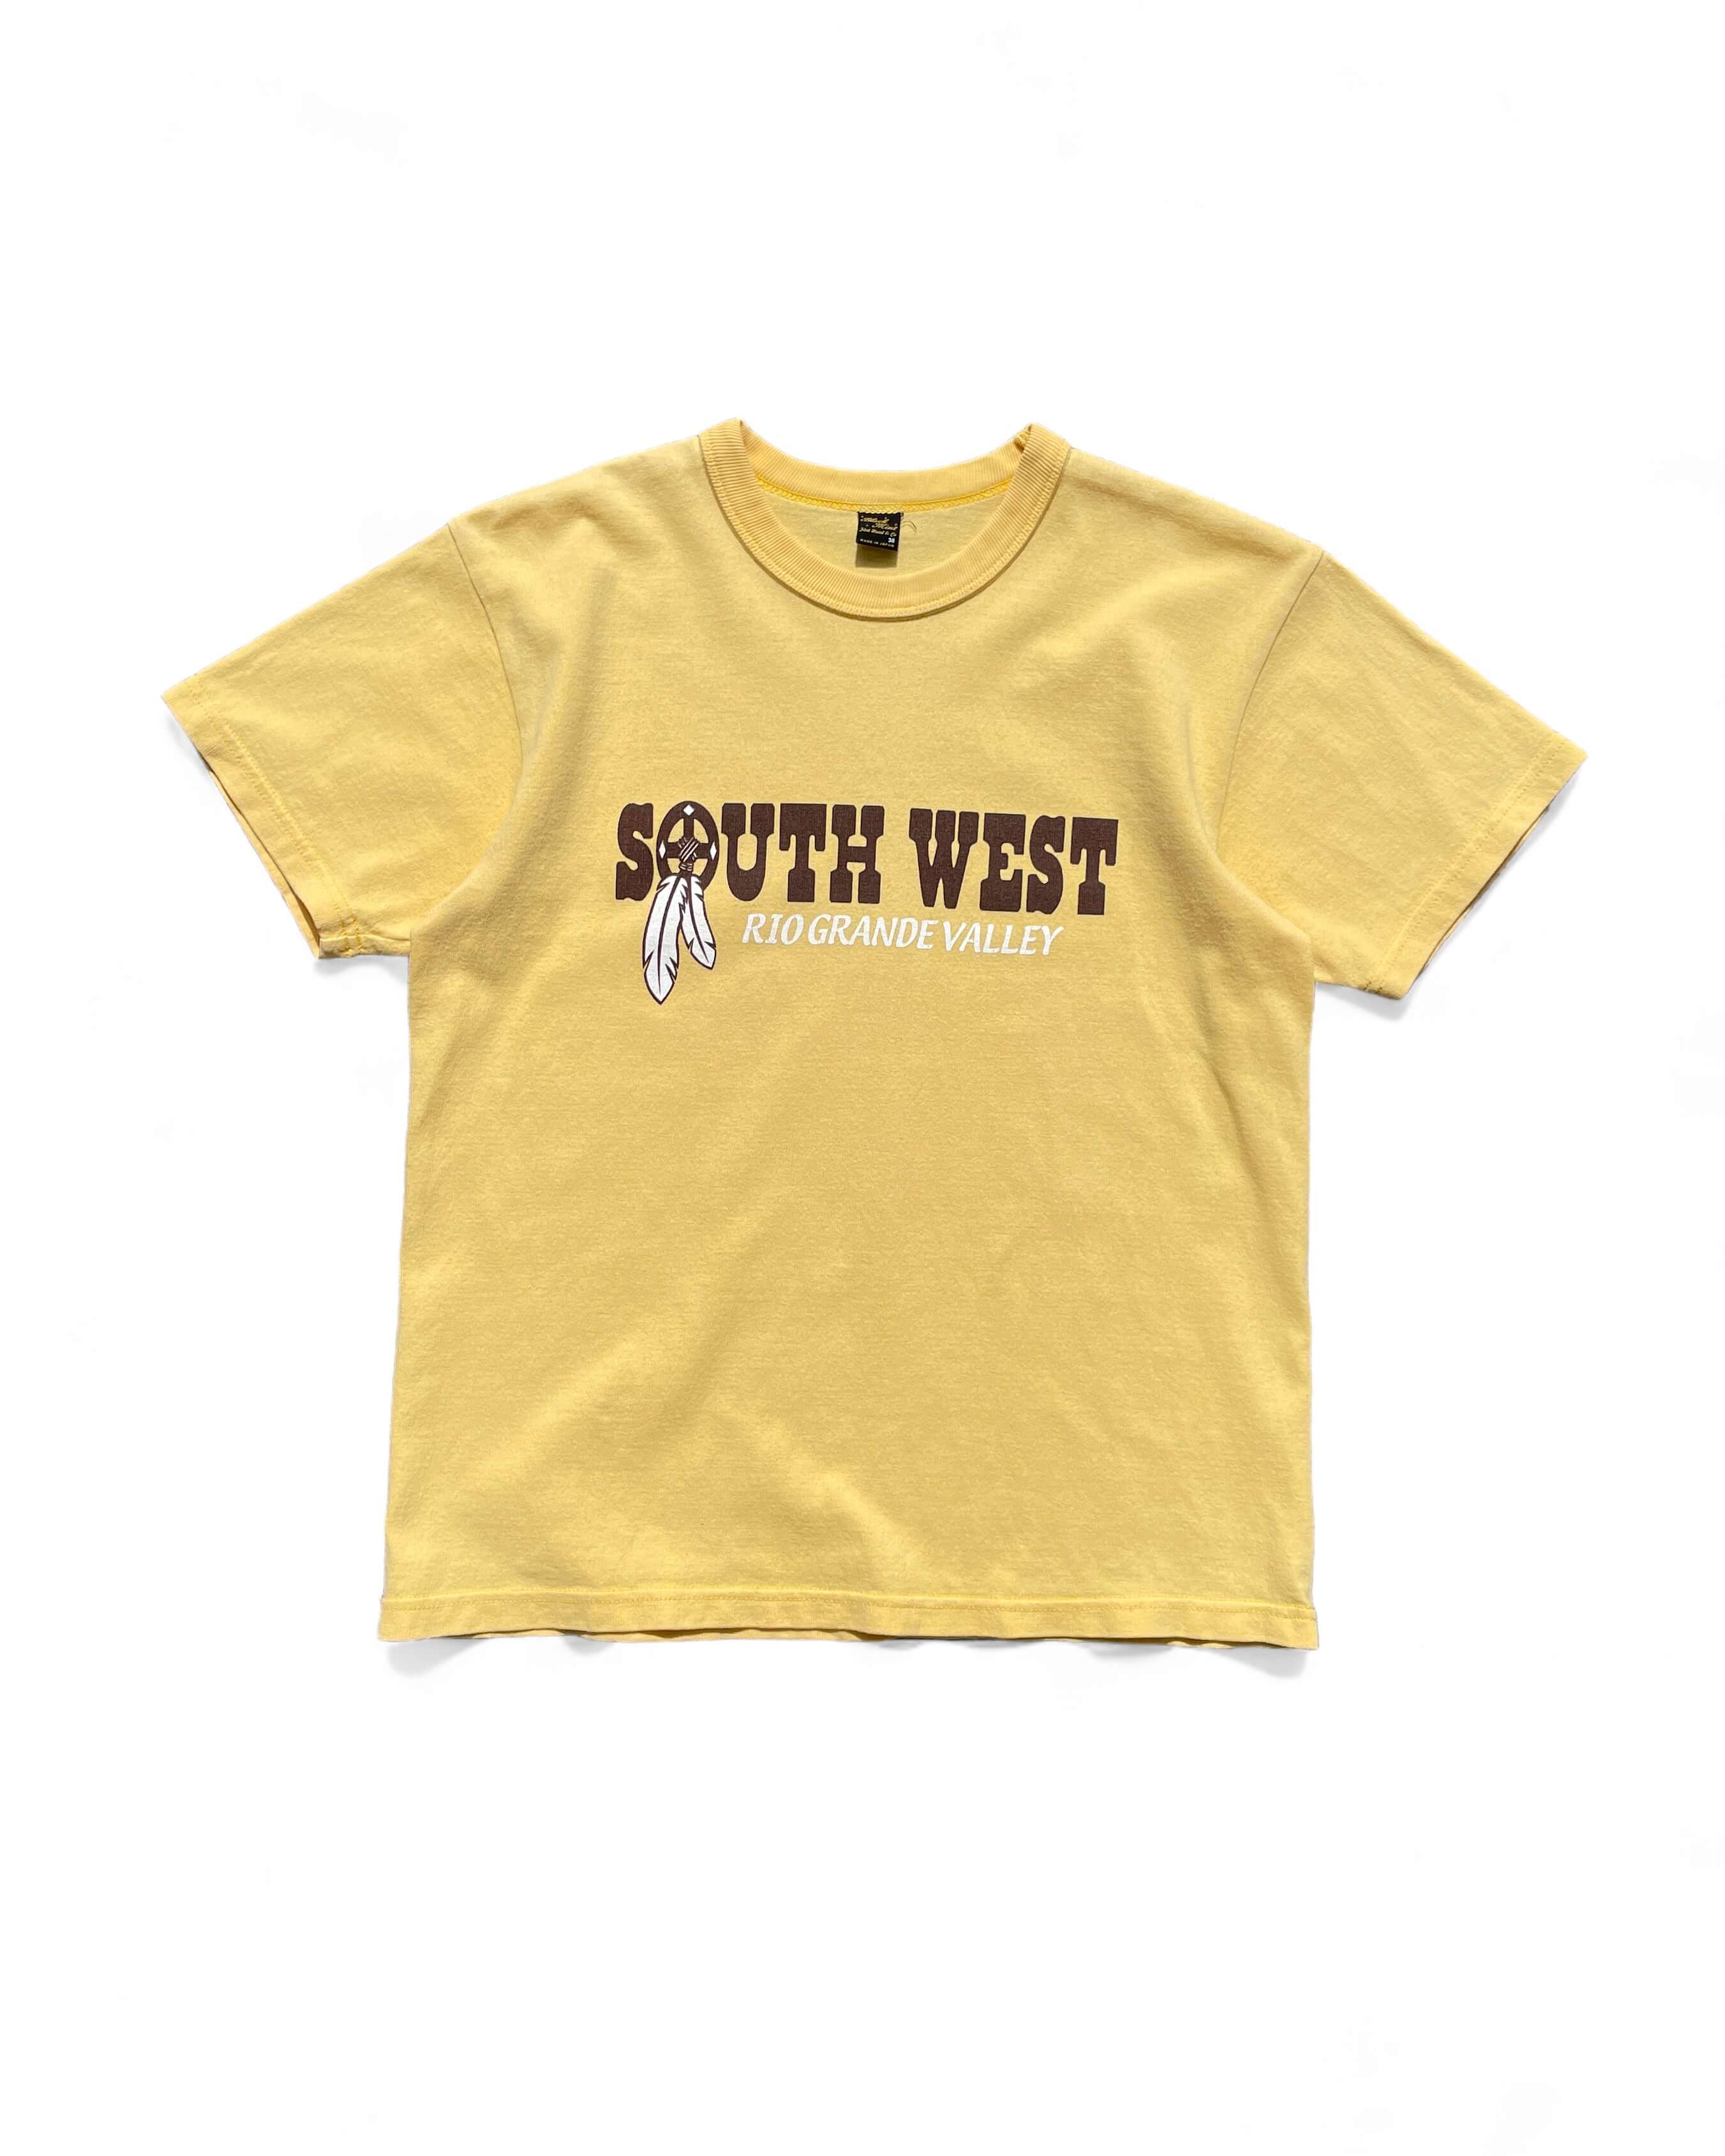 The Flat Head South West Rio Grande Valley T-shirts